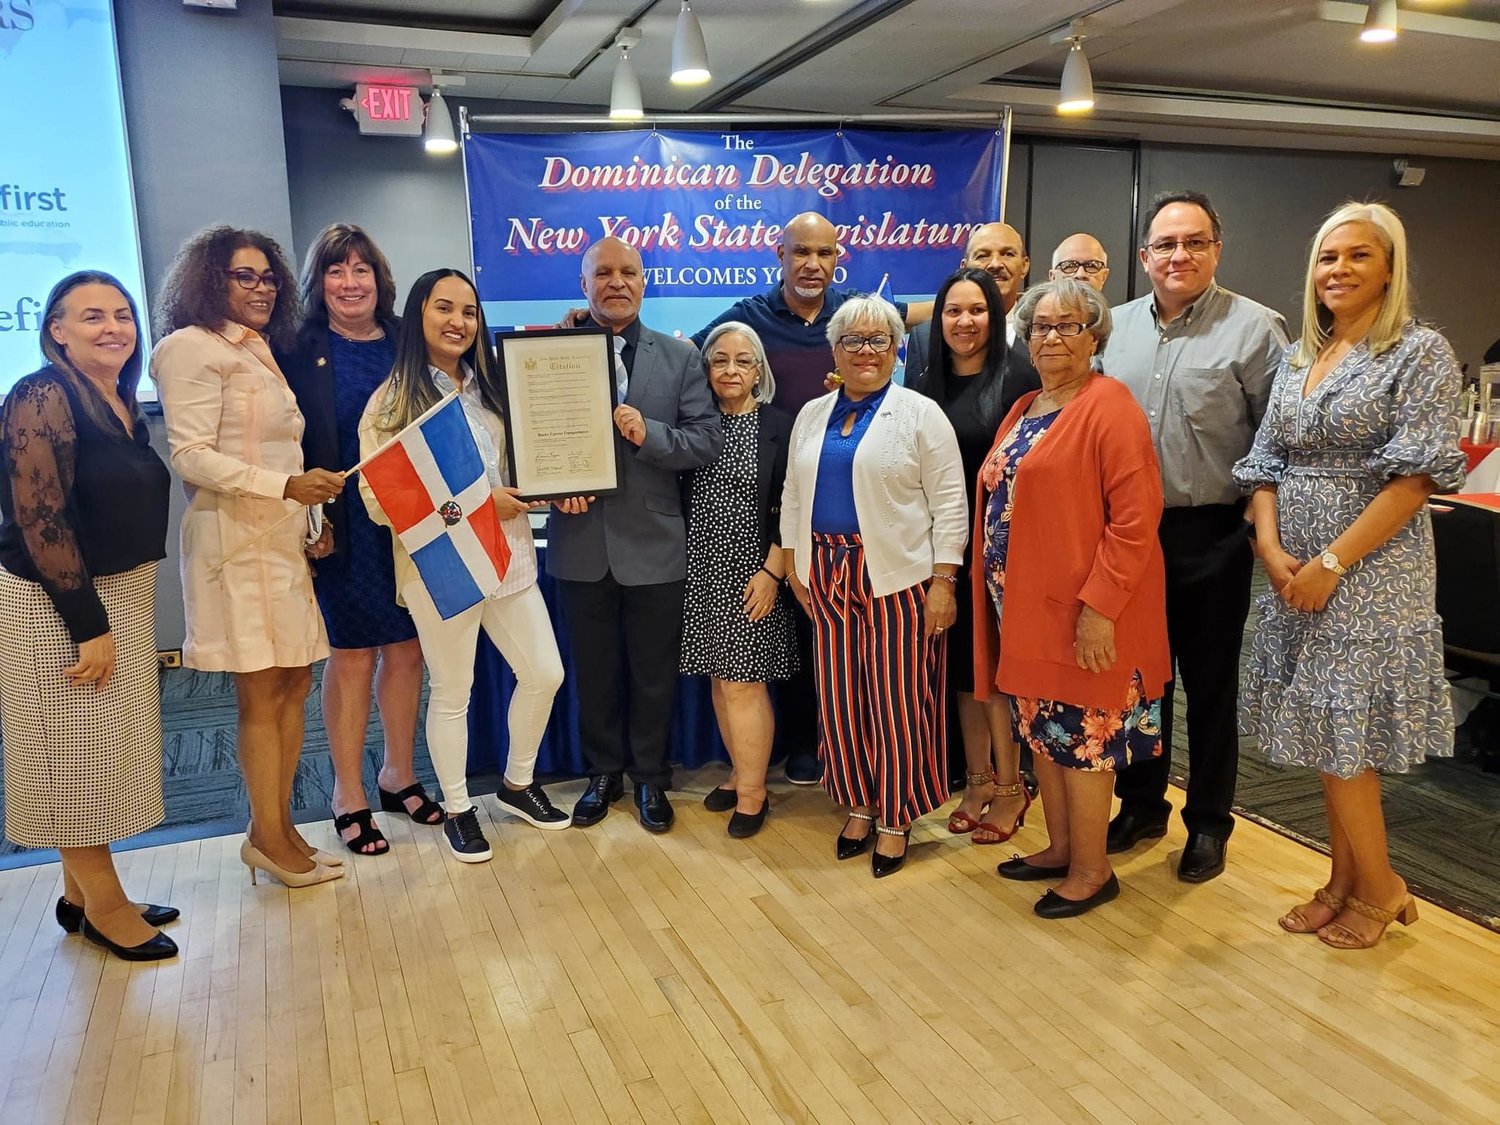 Assemblywoman Marianne Buttenschon, D-119, Utica, poses for a recent photo with local 2022 Dominican-American award recipients, including Carmen Sonia Martinez, Simon Bueno, and the Rodriguez family of Utica.